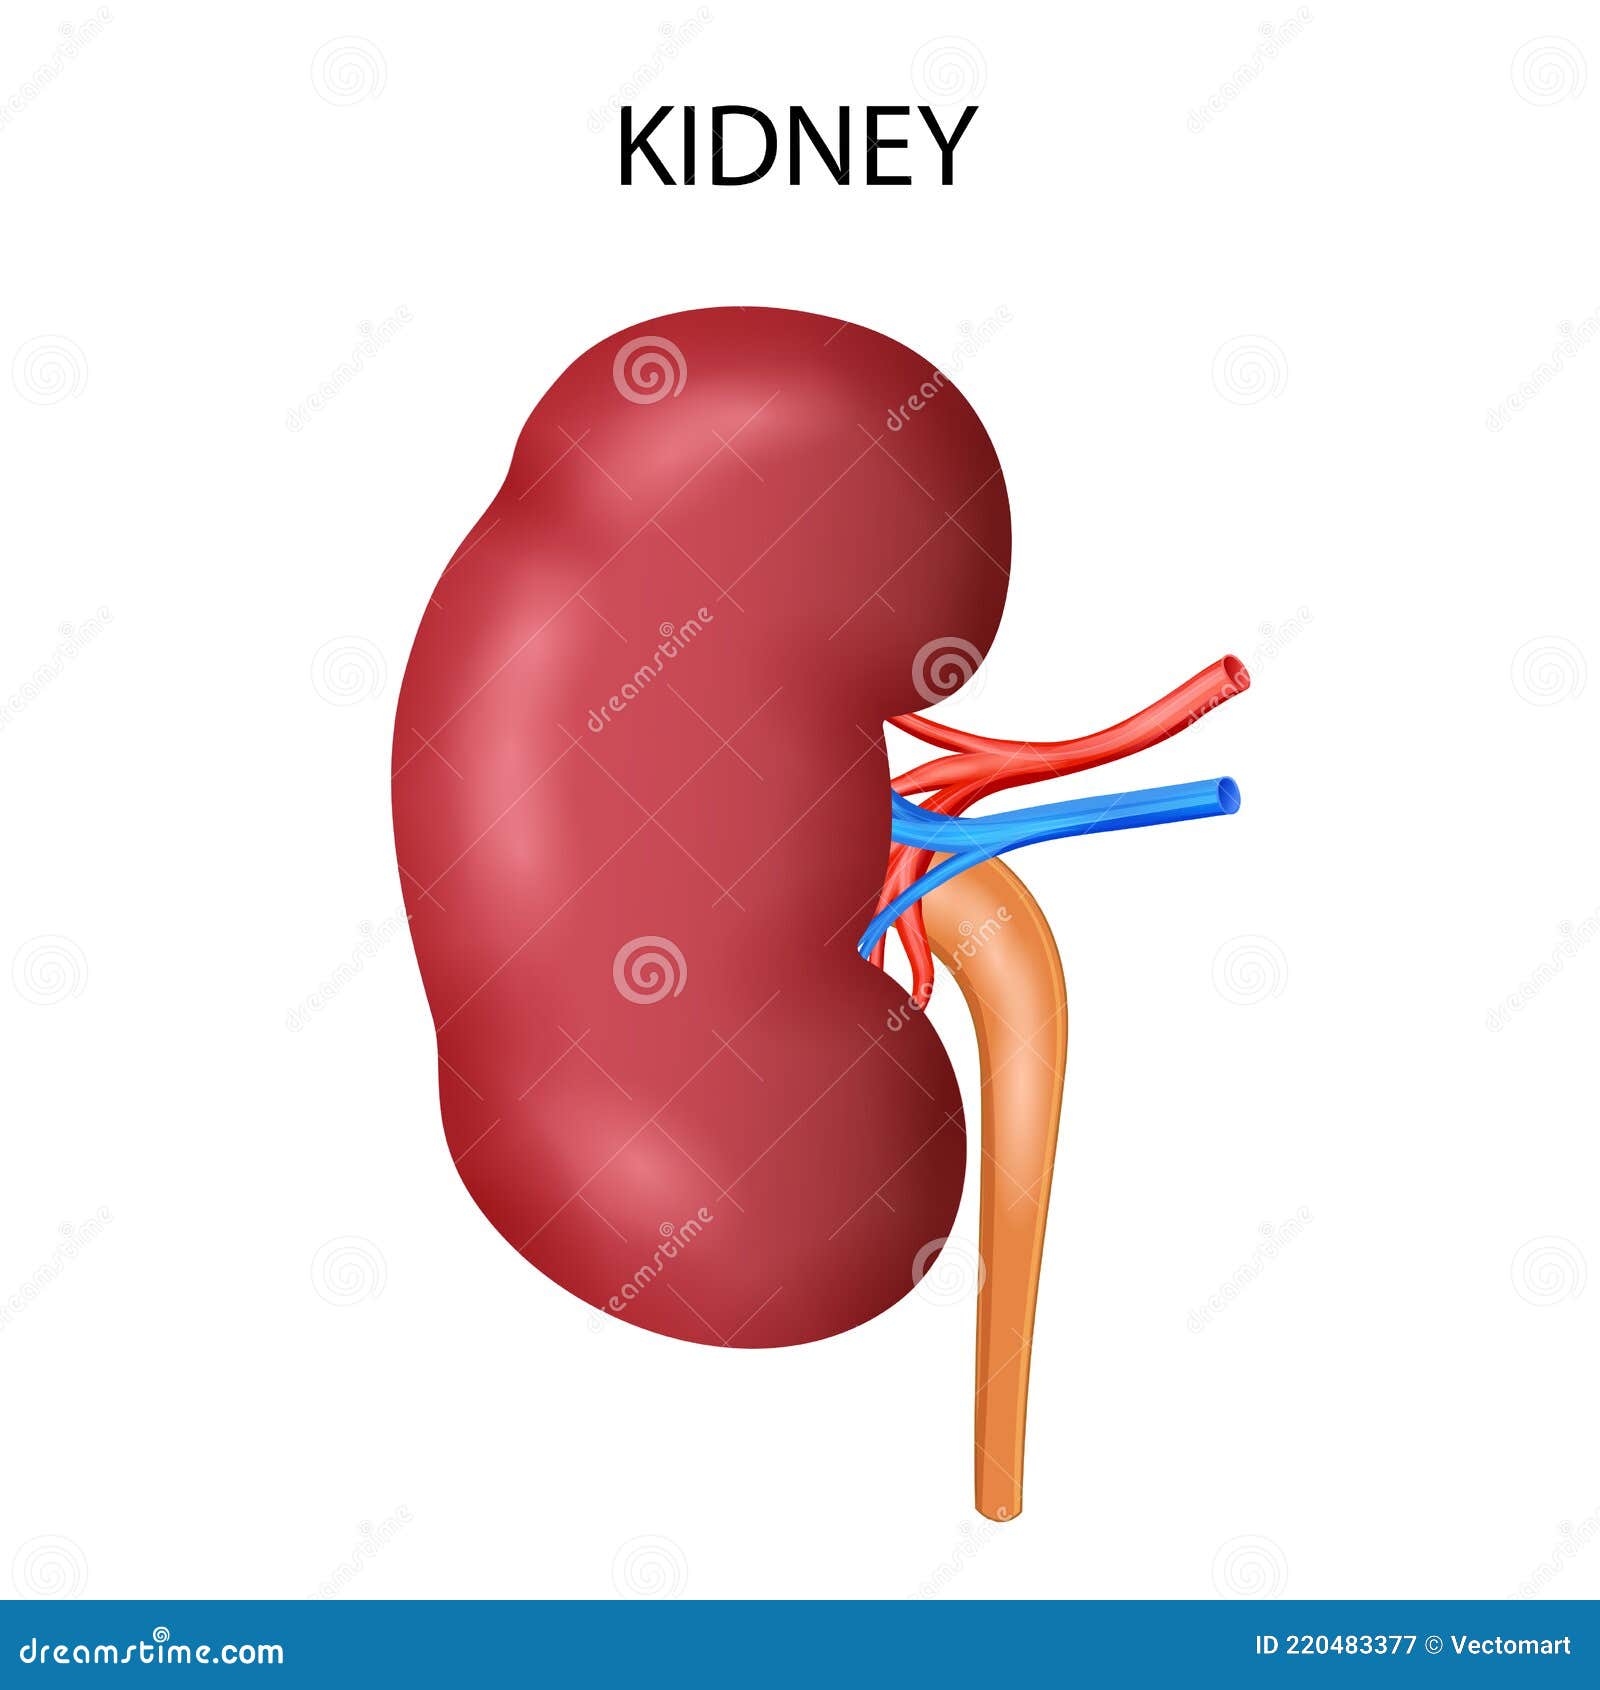 Healthcare and Medical Education Drawing Chart of Human Kidney for ...